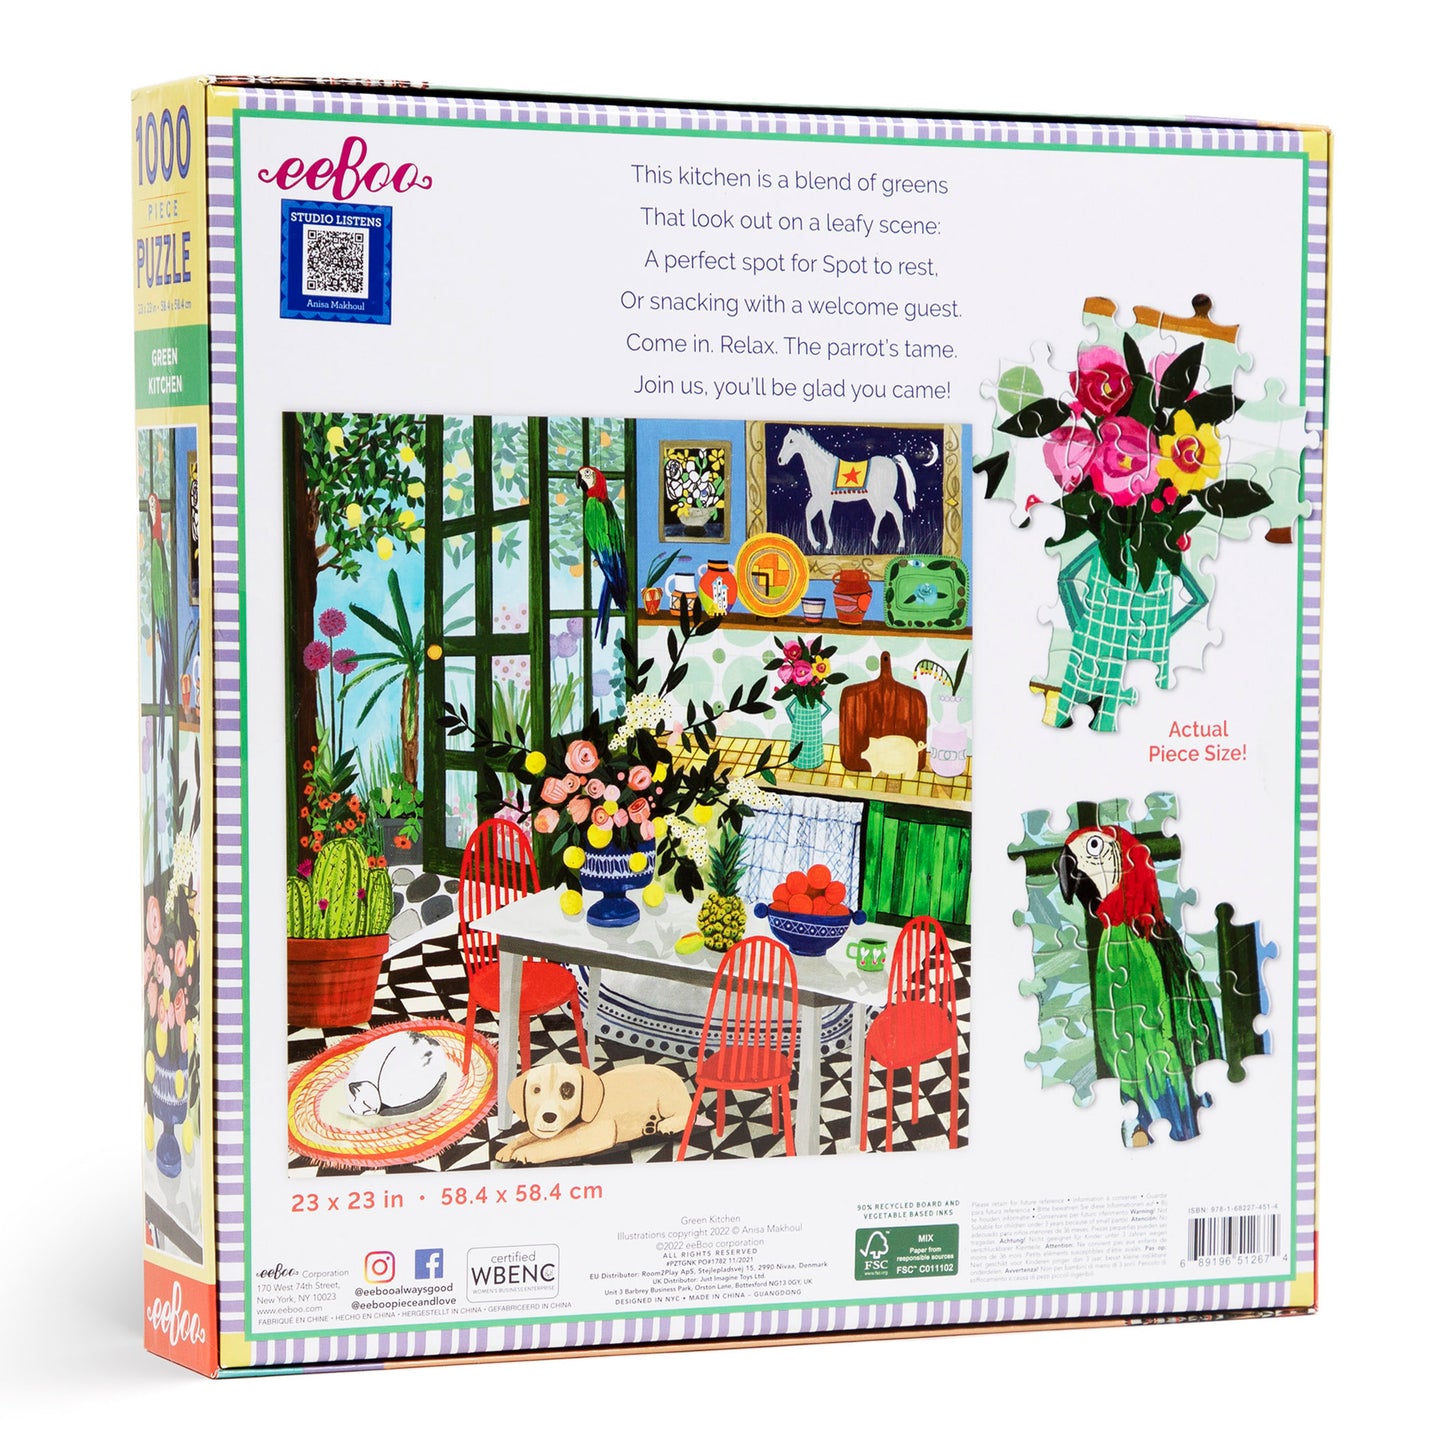 Green Kitchen 1000 Piece Jigsaw Puzzle | eeBoo Piece & Love | Cottagecore Gifts for Women Mom Wife